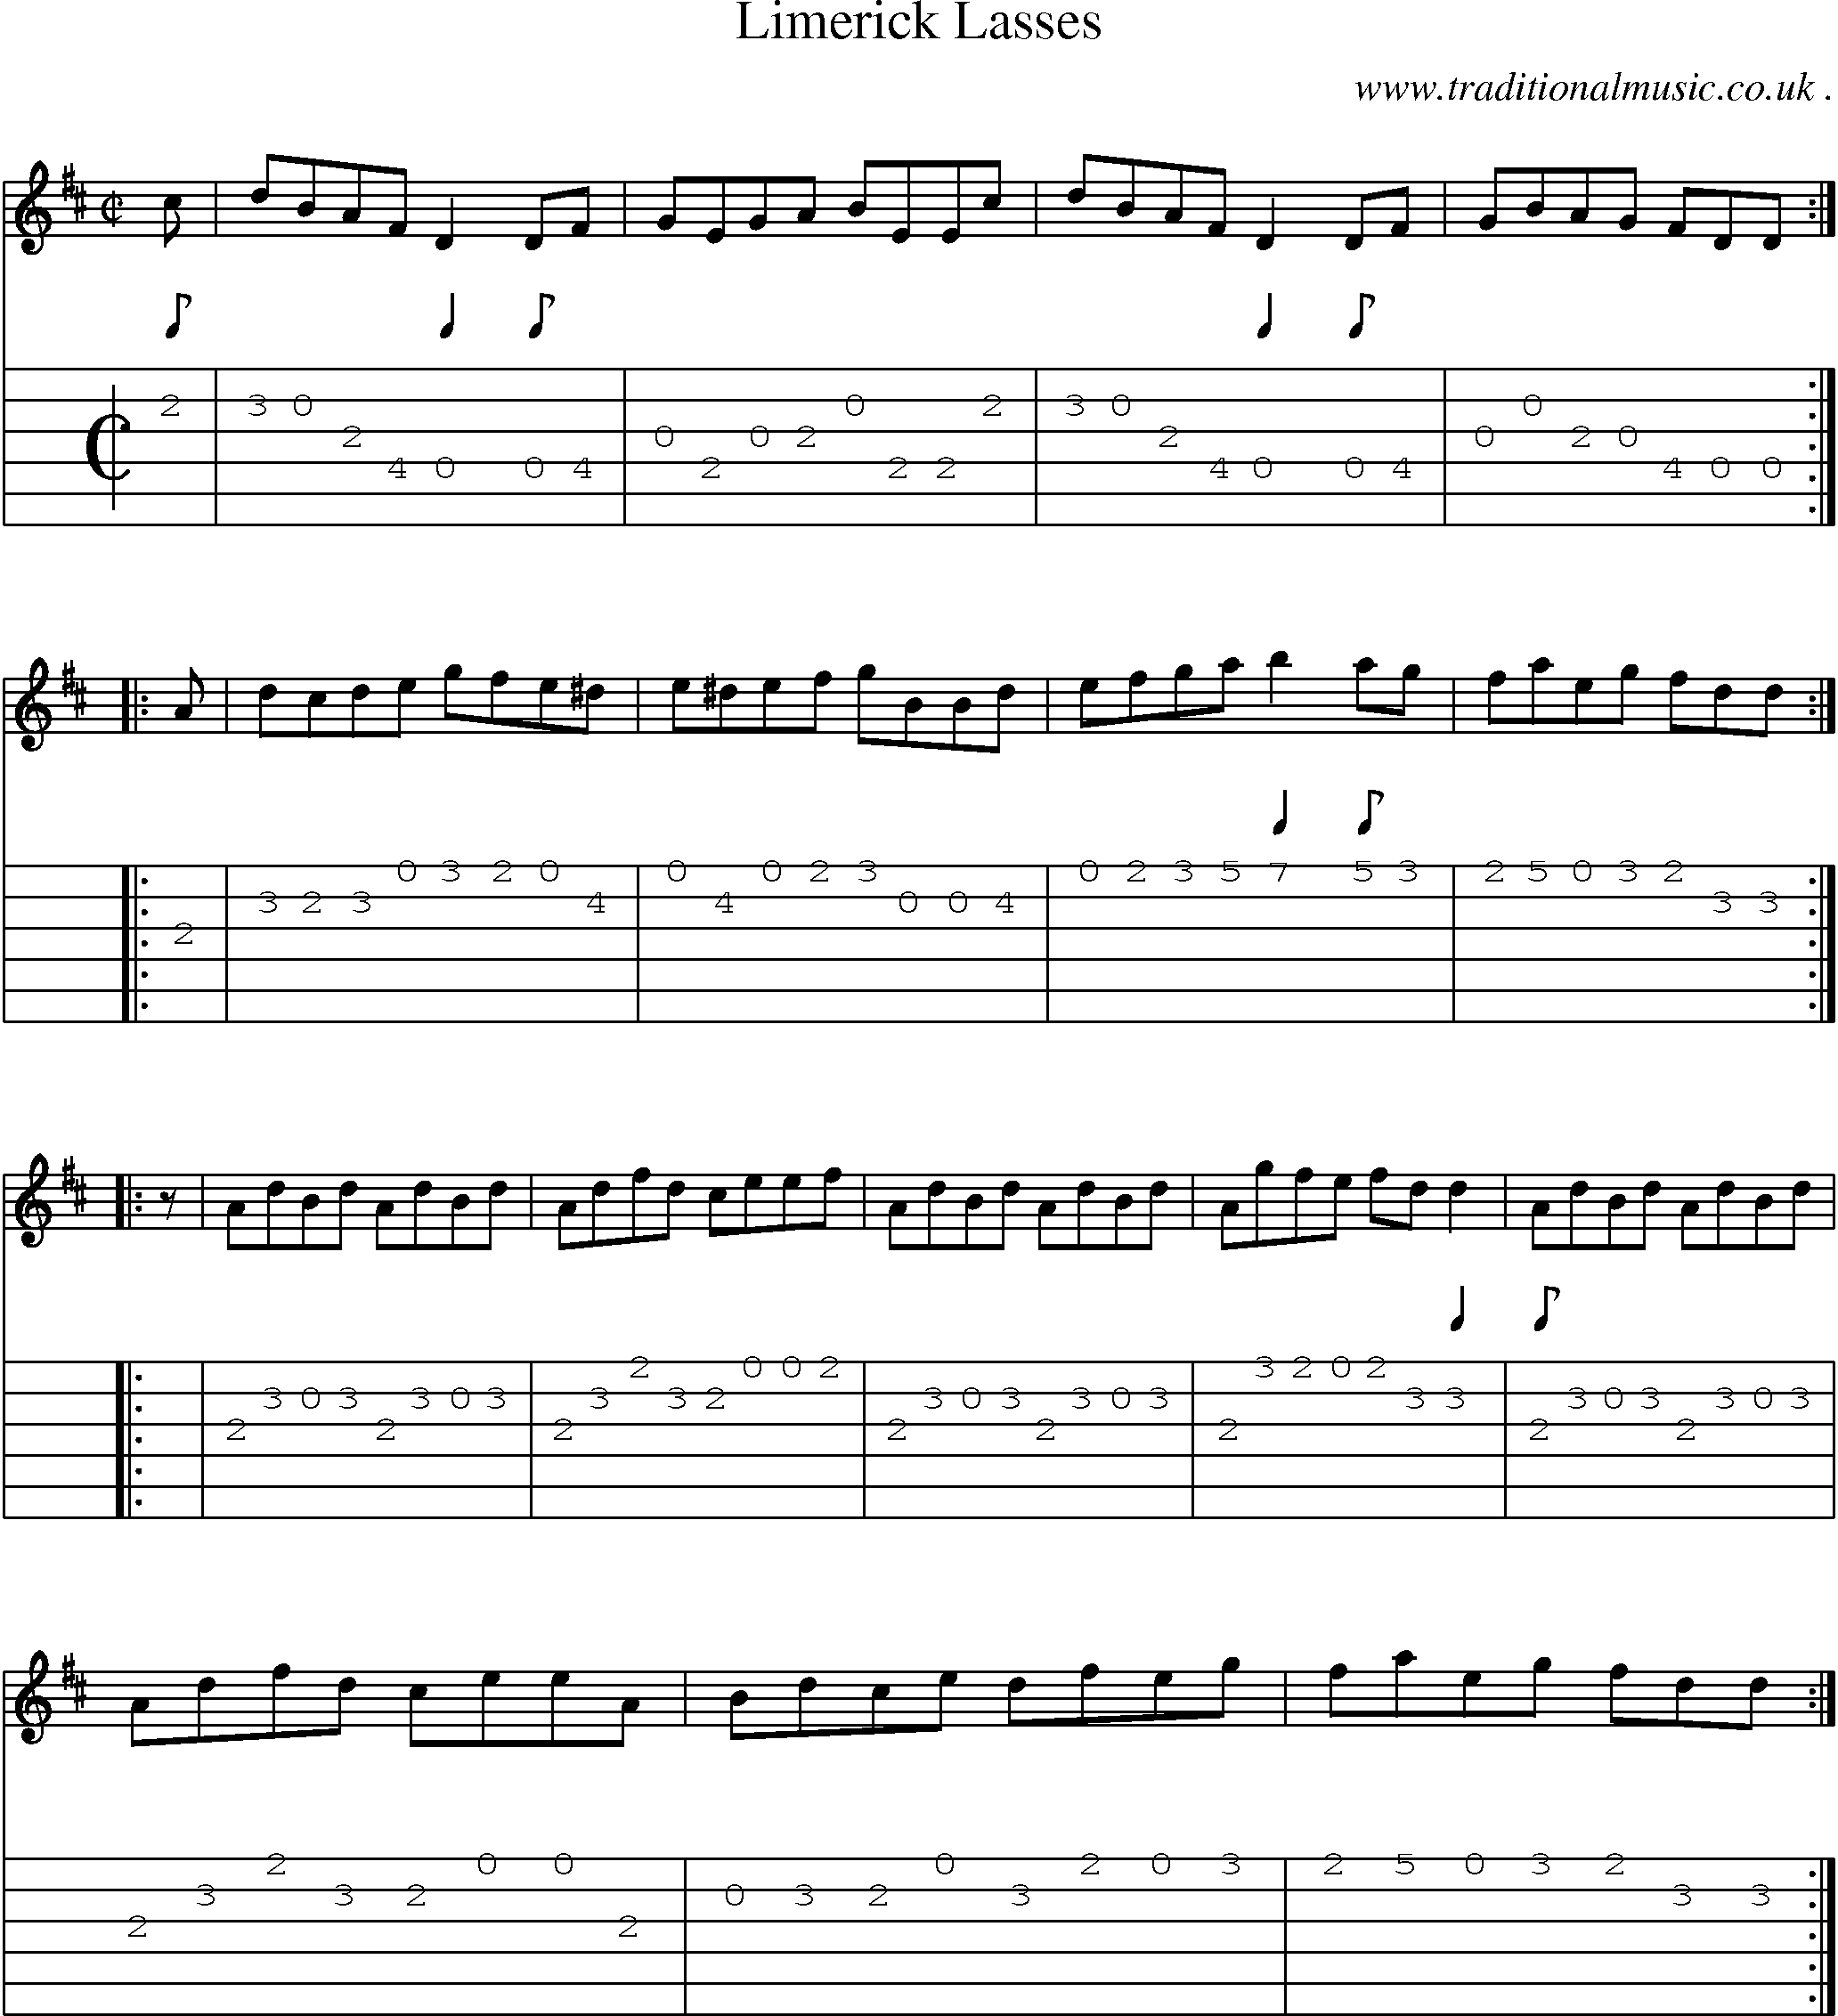 Sheet-music  score, Chords and Guitar Tabs for Limerick Lasses